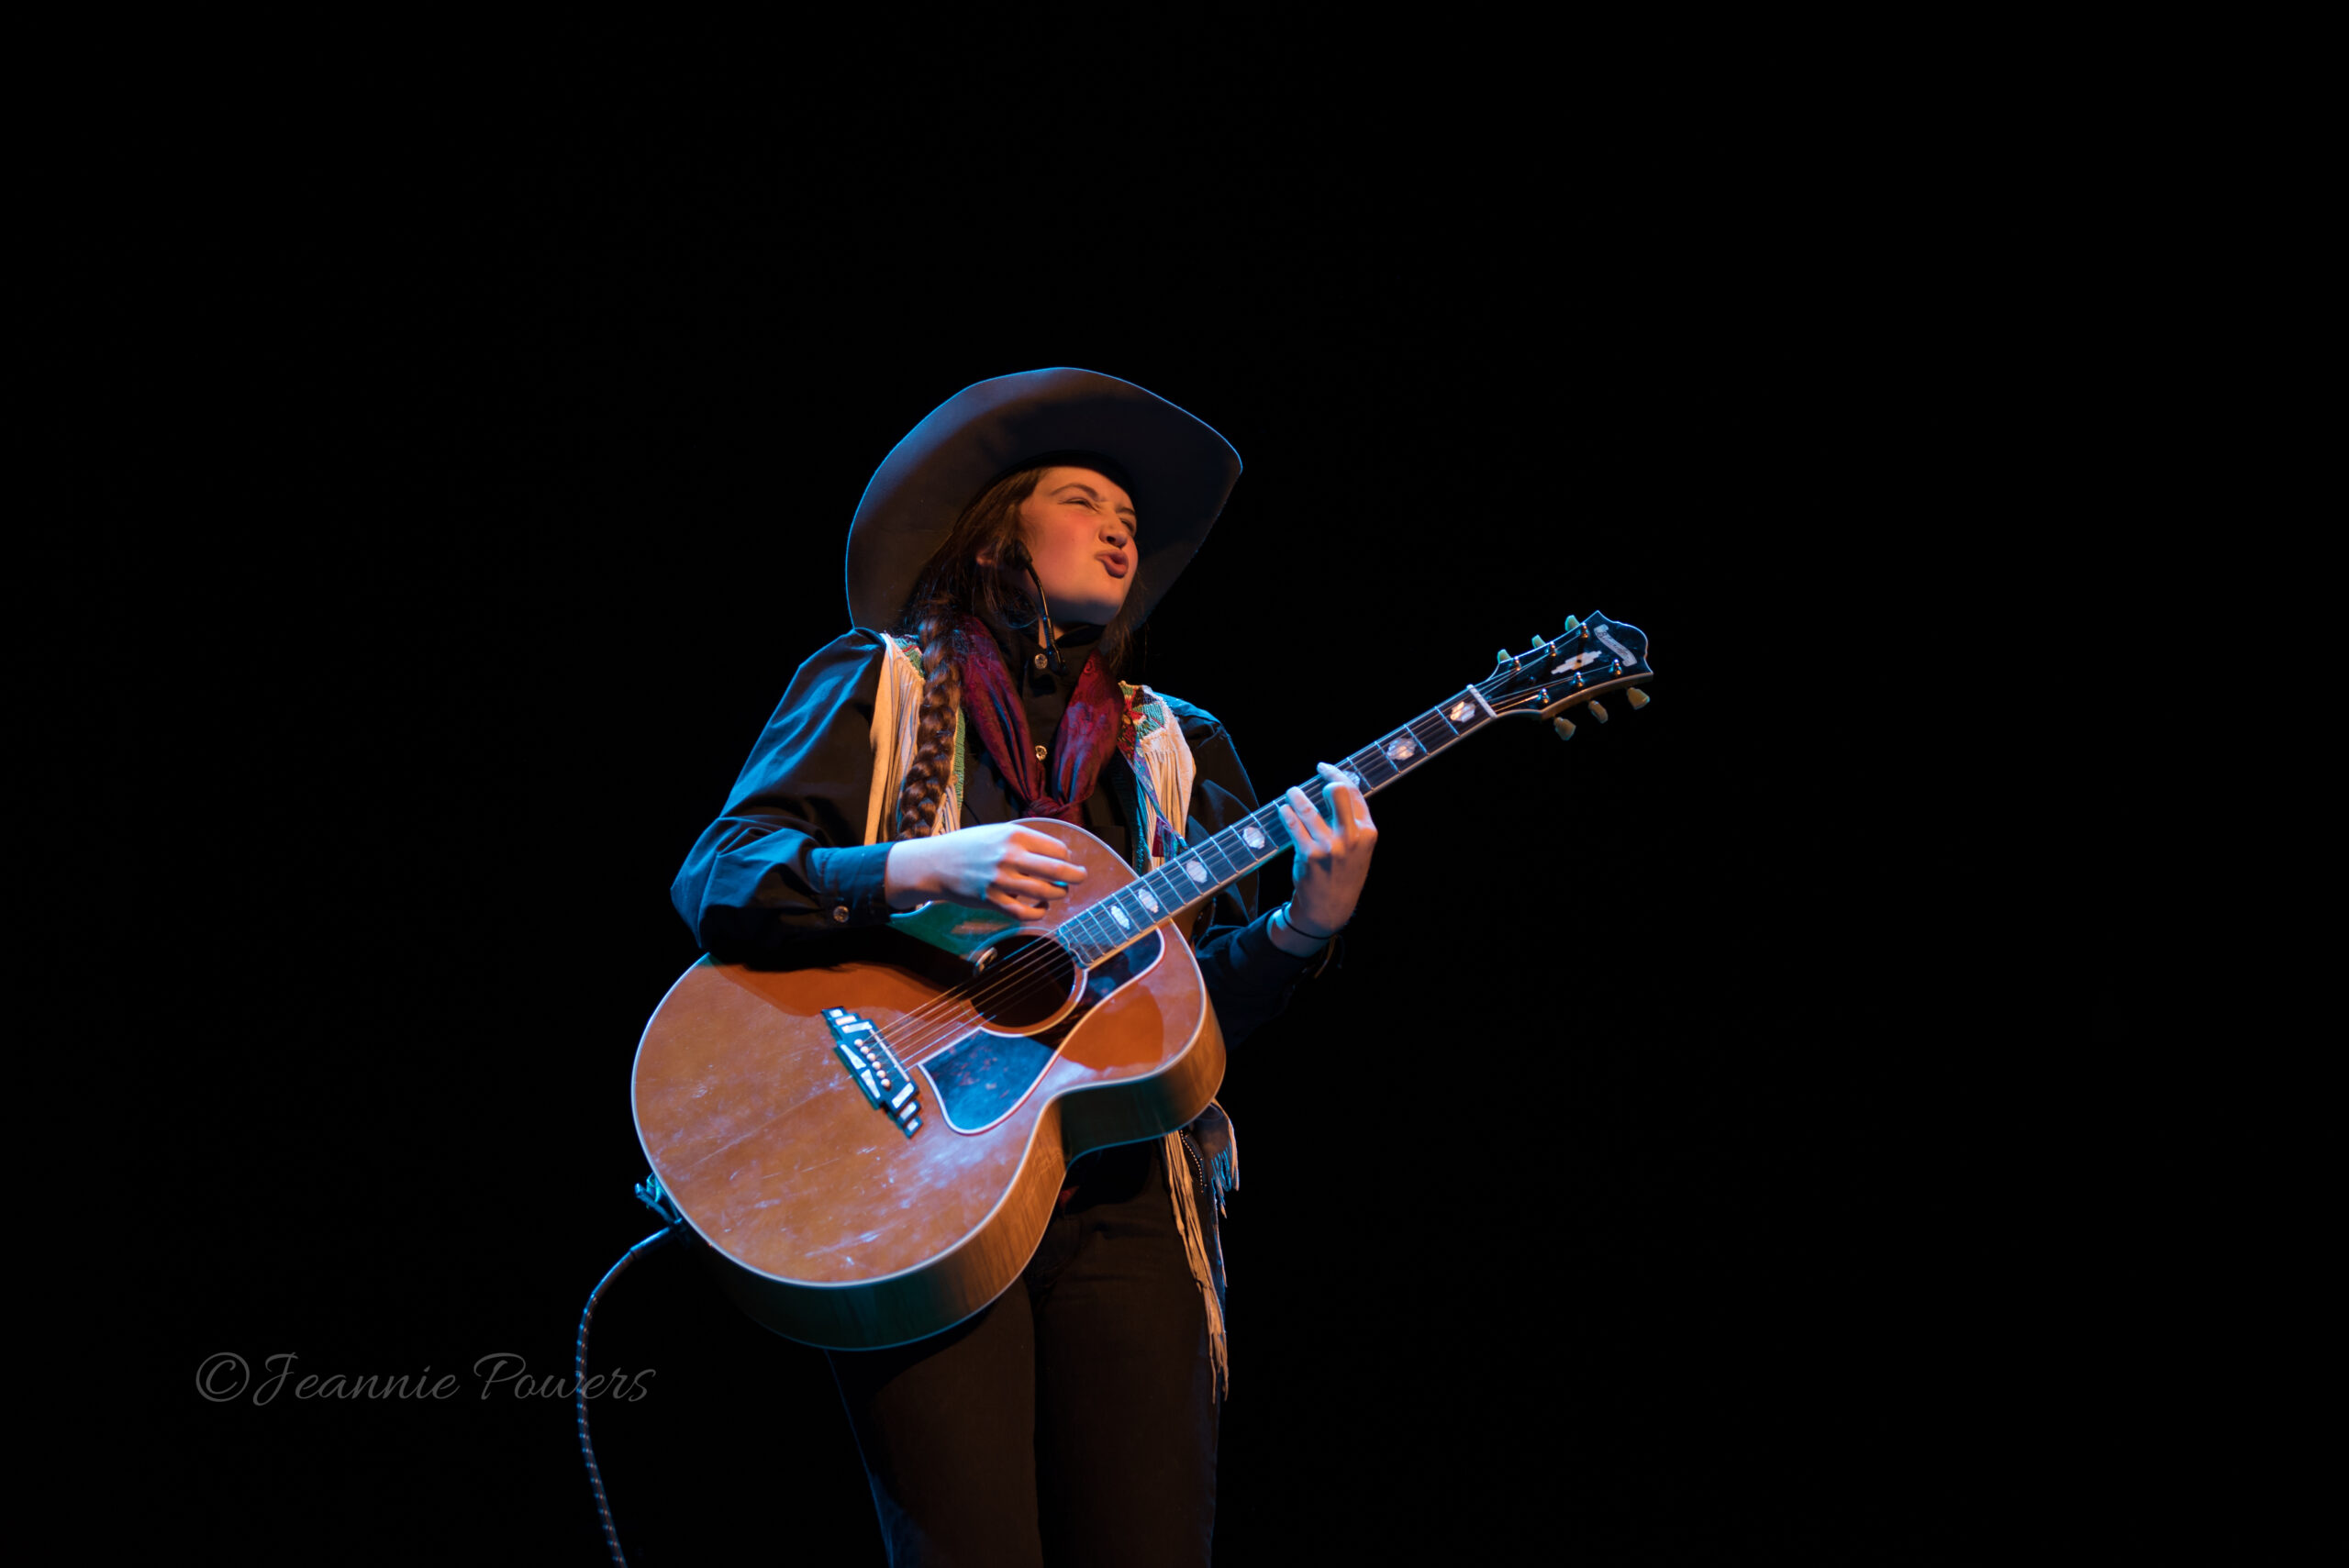 Jeneve Rose Mitchell performing on stage with acoustic guitar